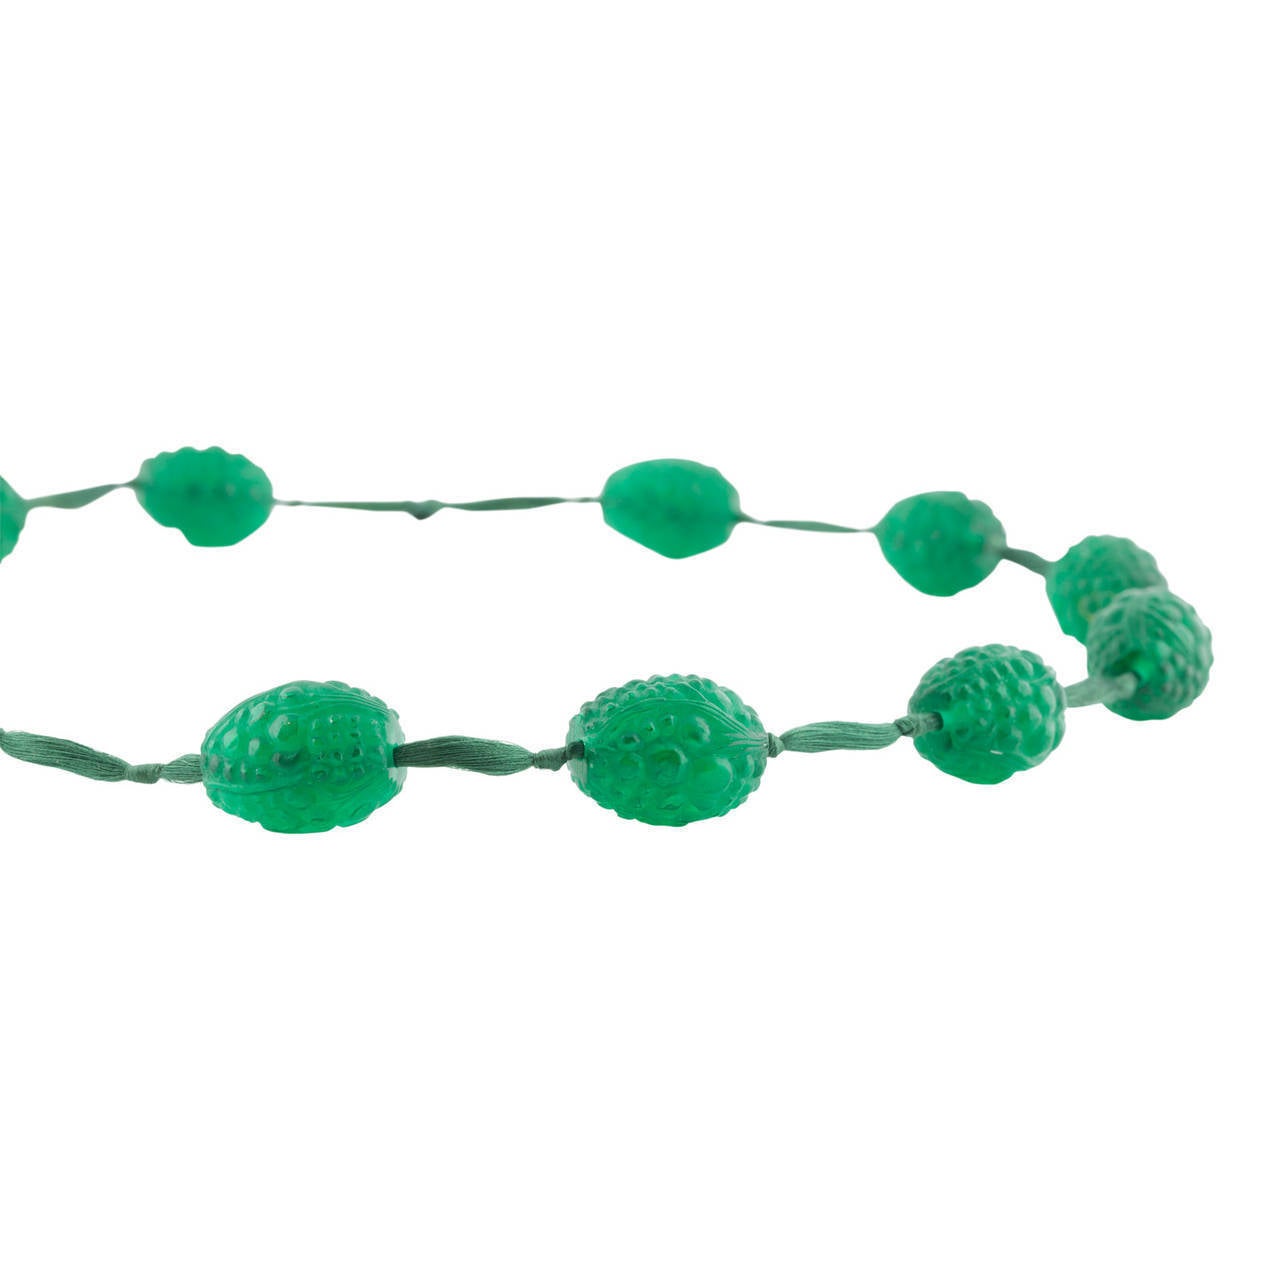 Lalique, René (1860-1945)
Grosses Graines Necklace  1920
12 Emerald green Lalique beads in the shape of  large grains, threaded on matching silk cord. Featured in Lalique catalogues from 1928 and 1932, not produced after